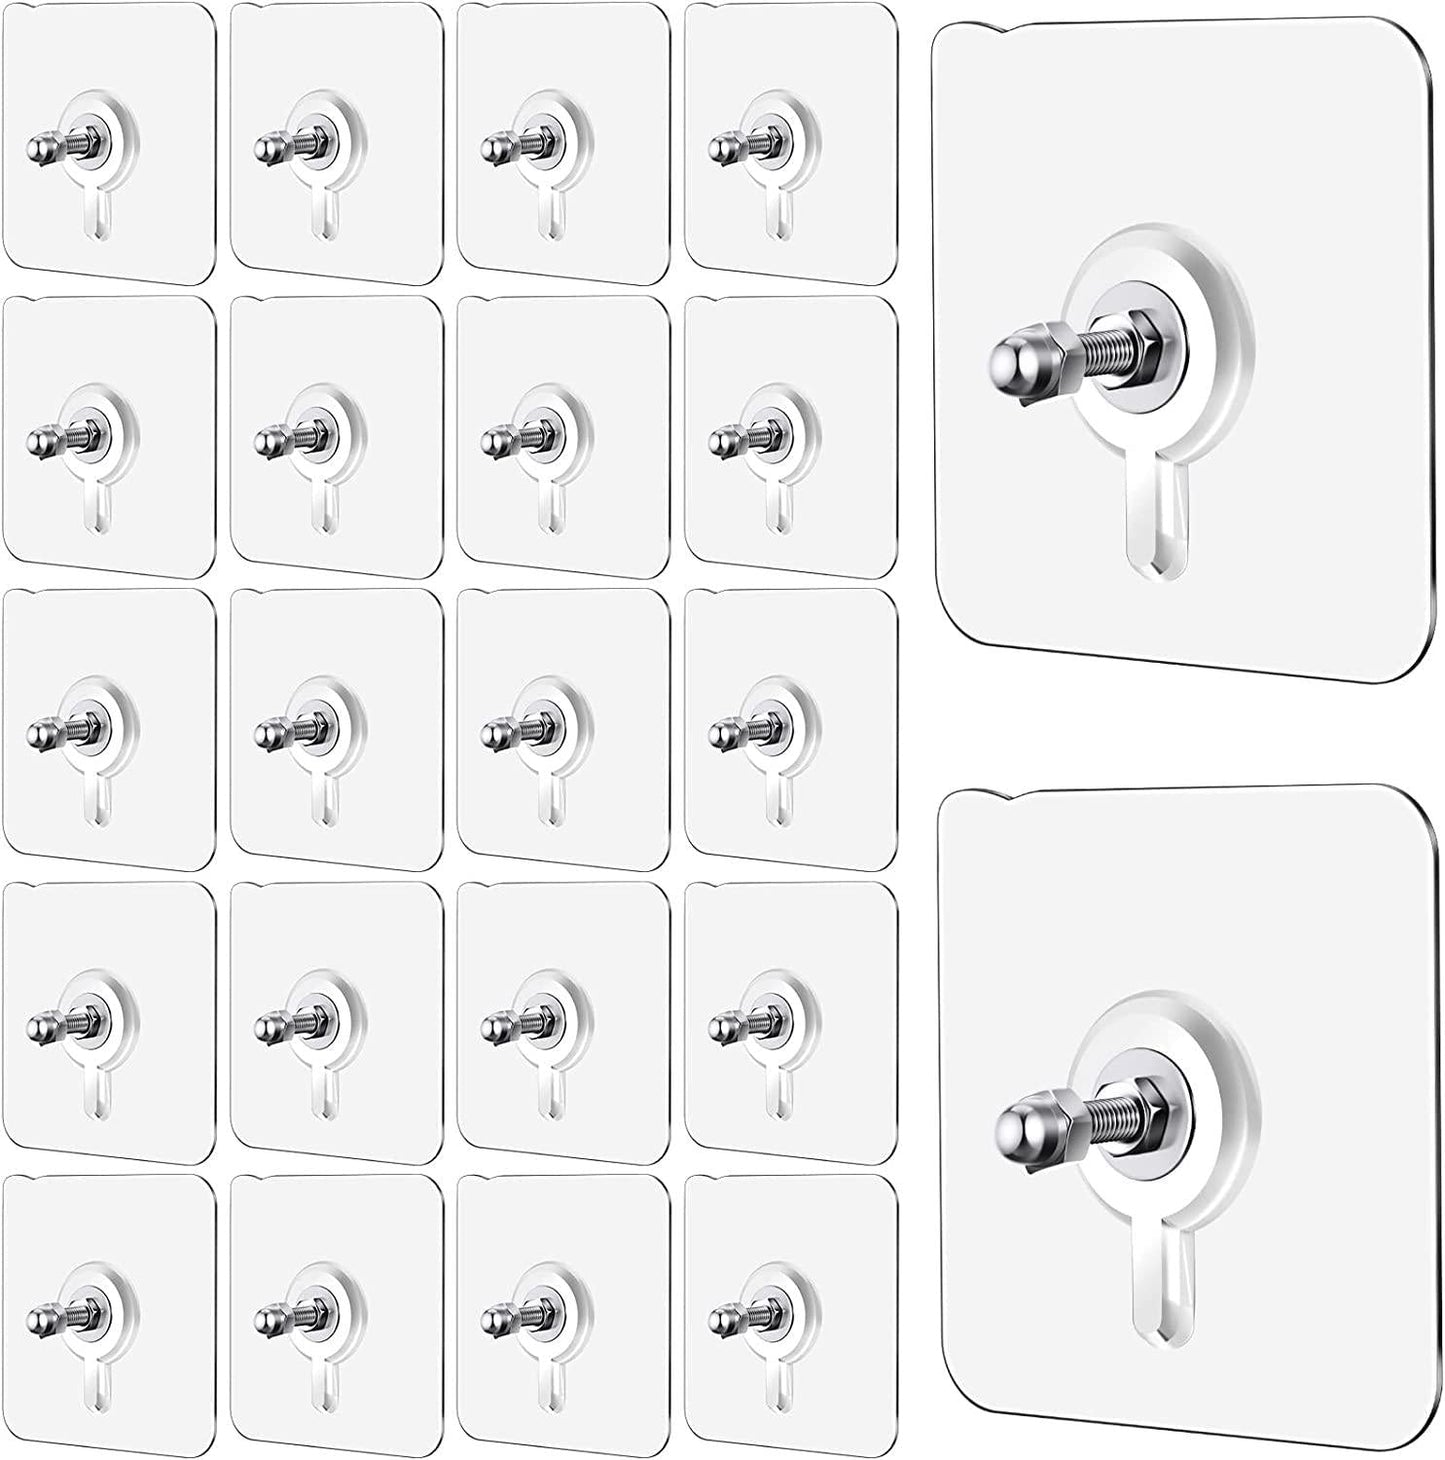 Wall Hooks, Adhesive Wall Screws Hanging Nails, No-Drilling Waterproof Screw Free Stickers for Hanging, Heavy-Duty Adhesive Wall Mount Screw Hooks for Kitchen Bathroom Bedroom Living Room 10 Pcs - Deal IND.